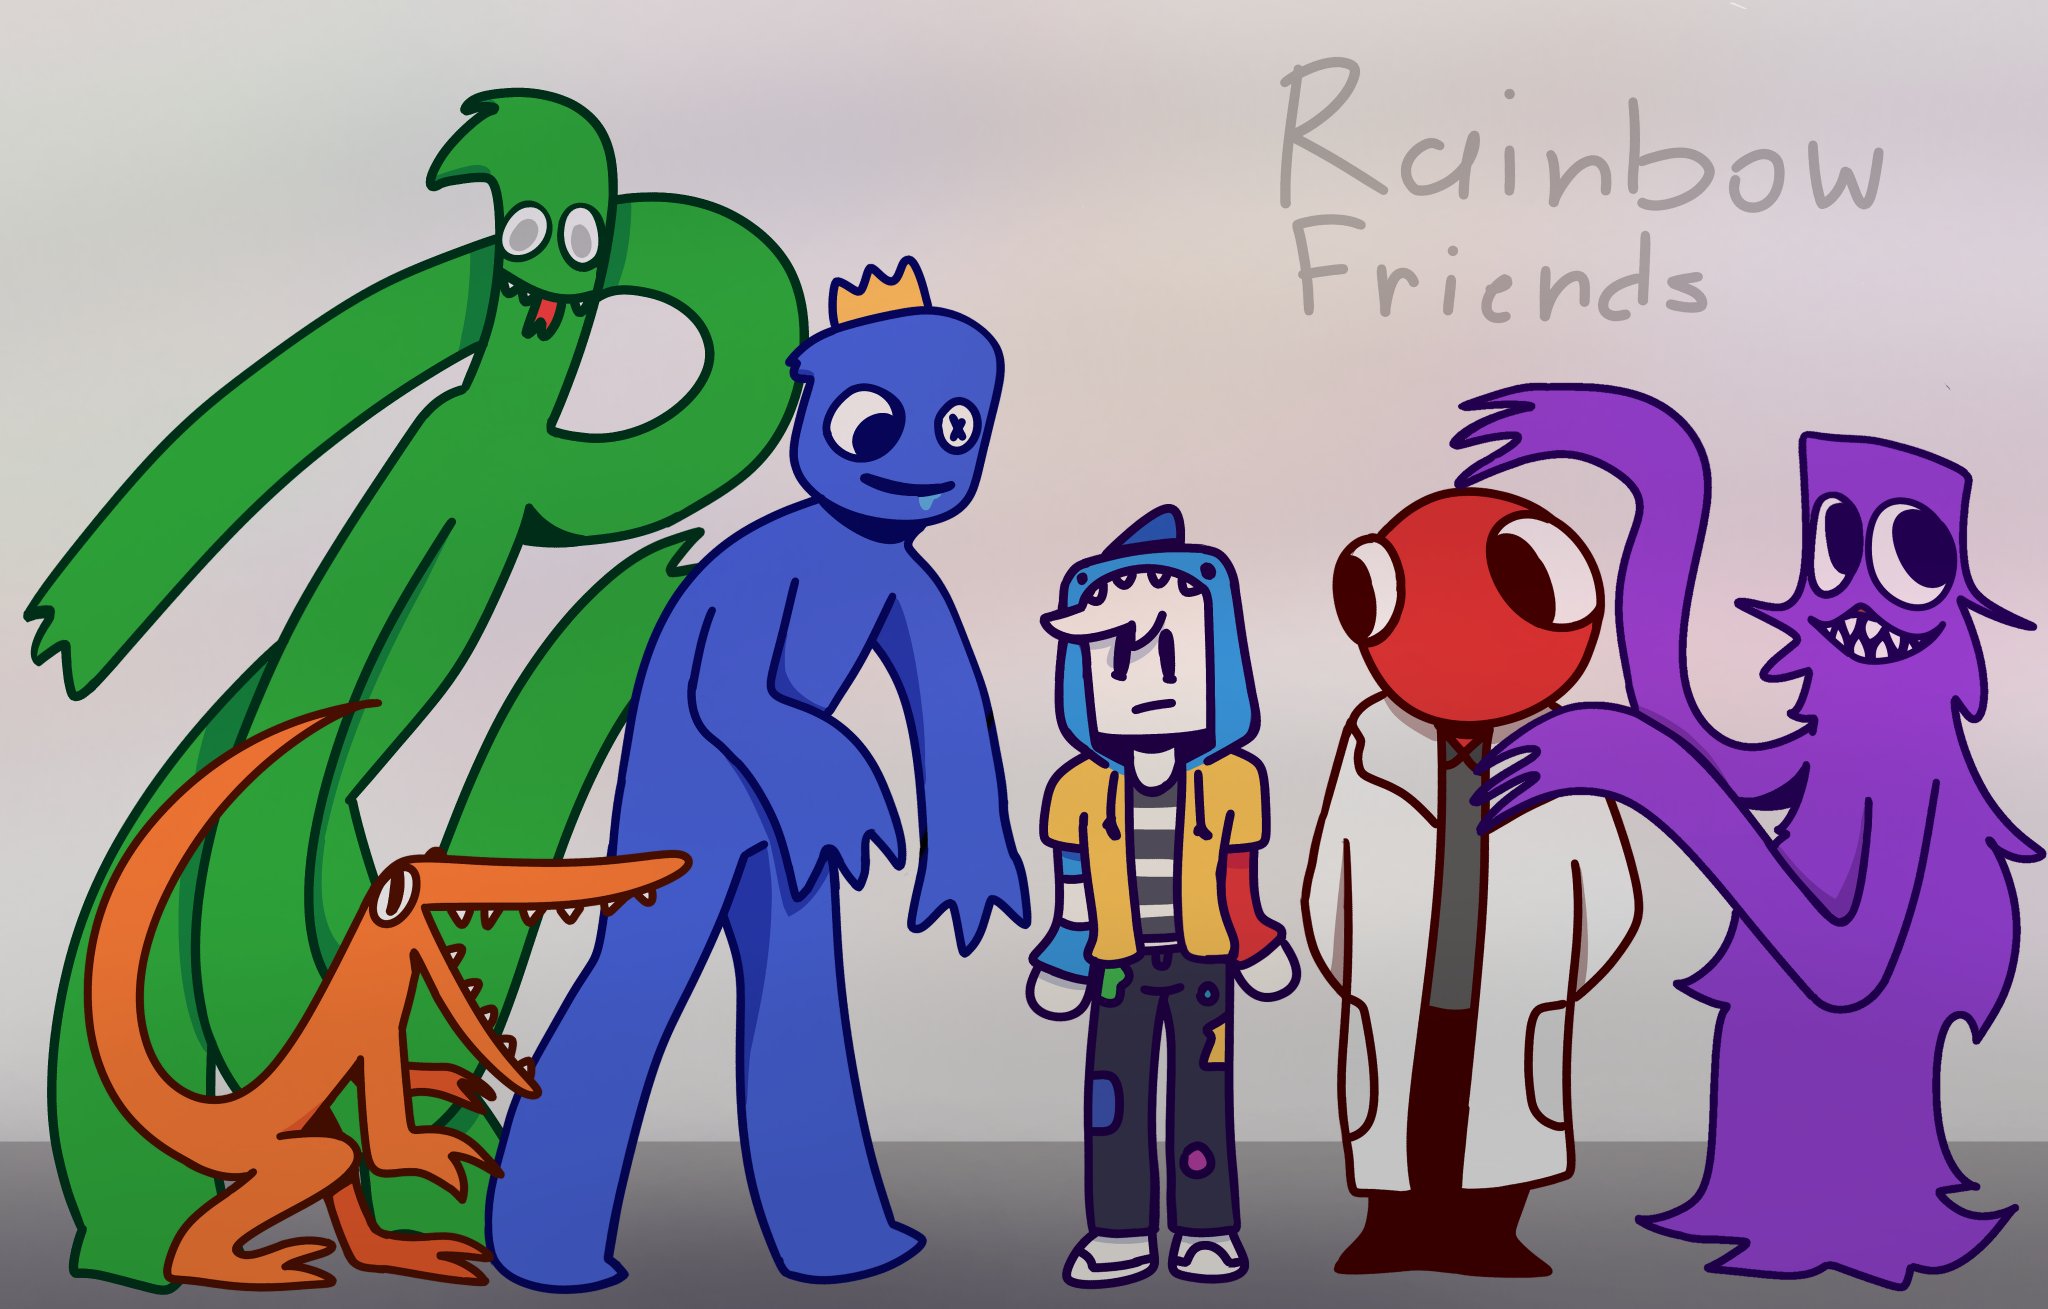 nOObz! (Hell Ember main) on X: Rainbow Friends on Roblox by  @FragmentGames_ is really fun, played with a homie multiple times! Drew  them in my mini drawing book lol Y'all should play